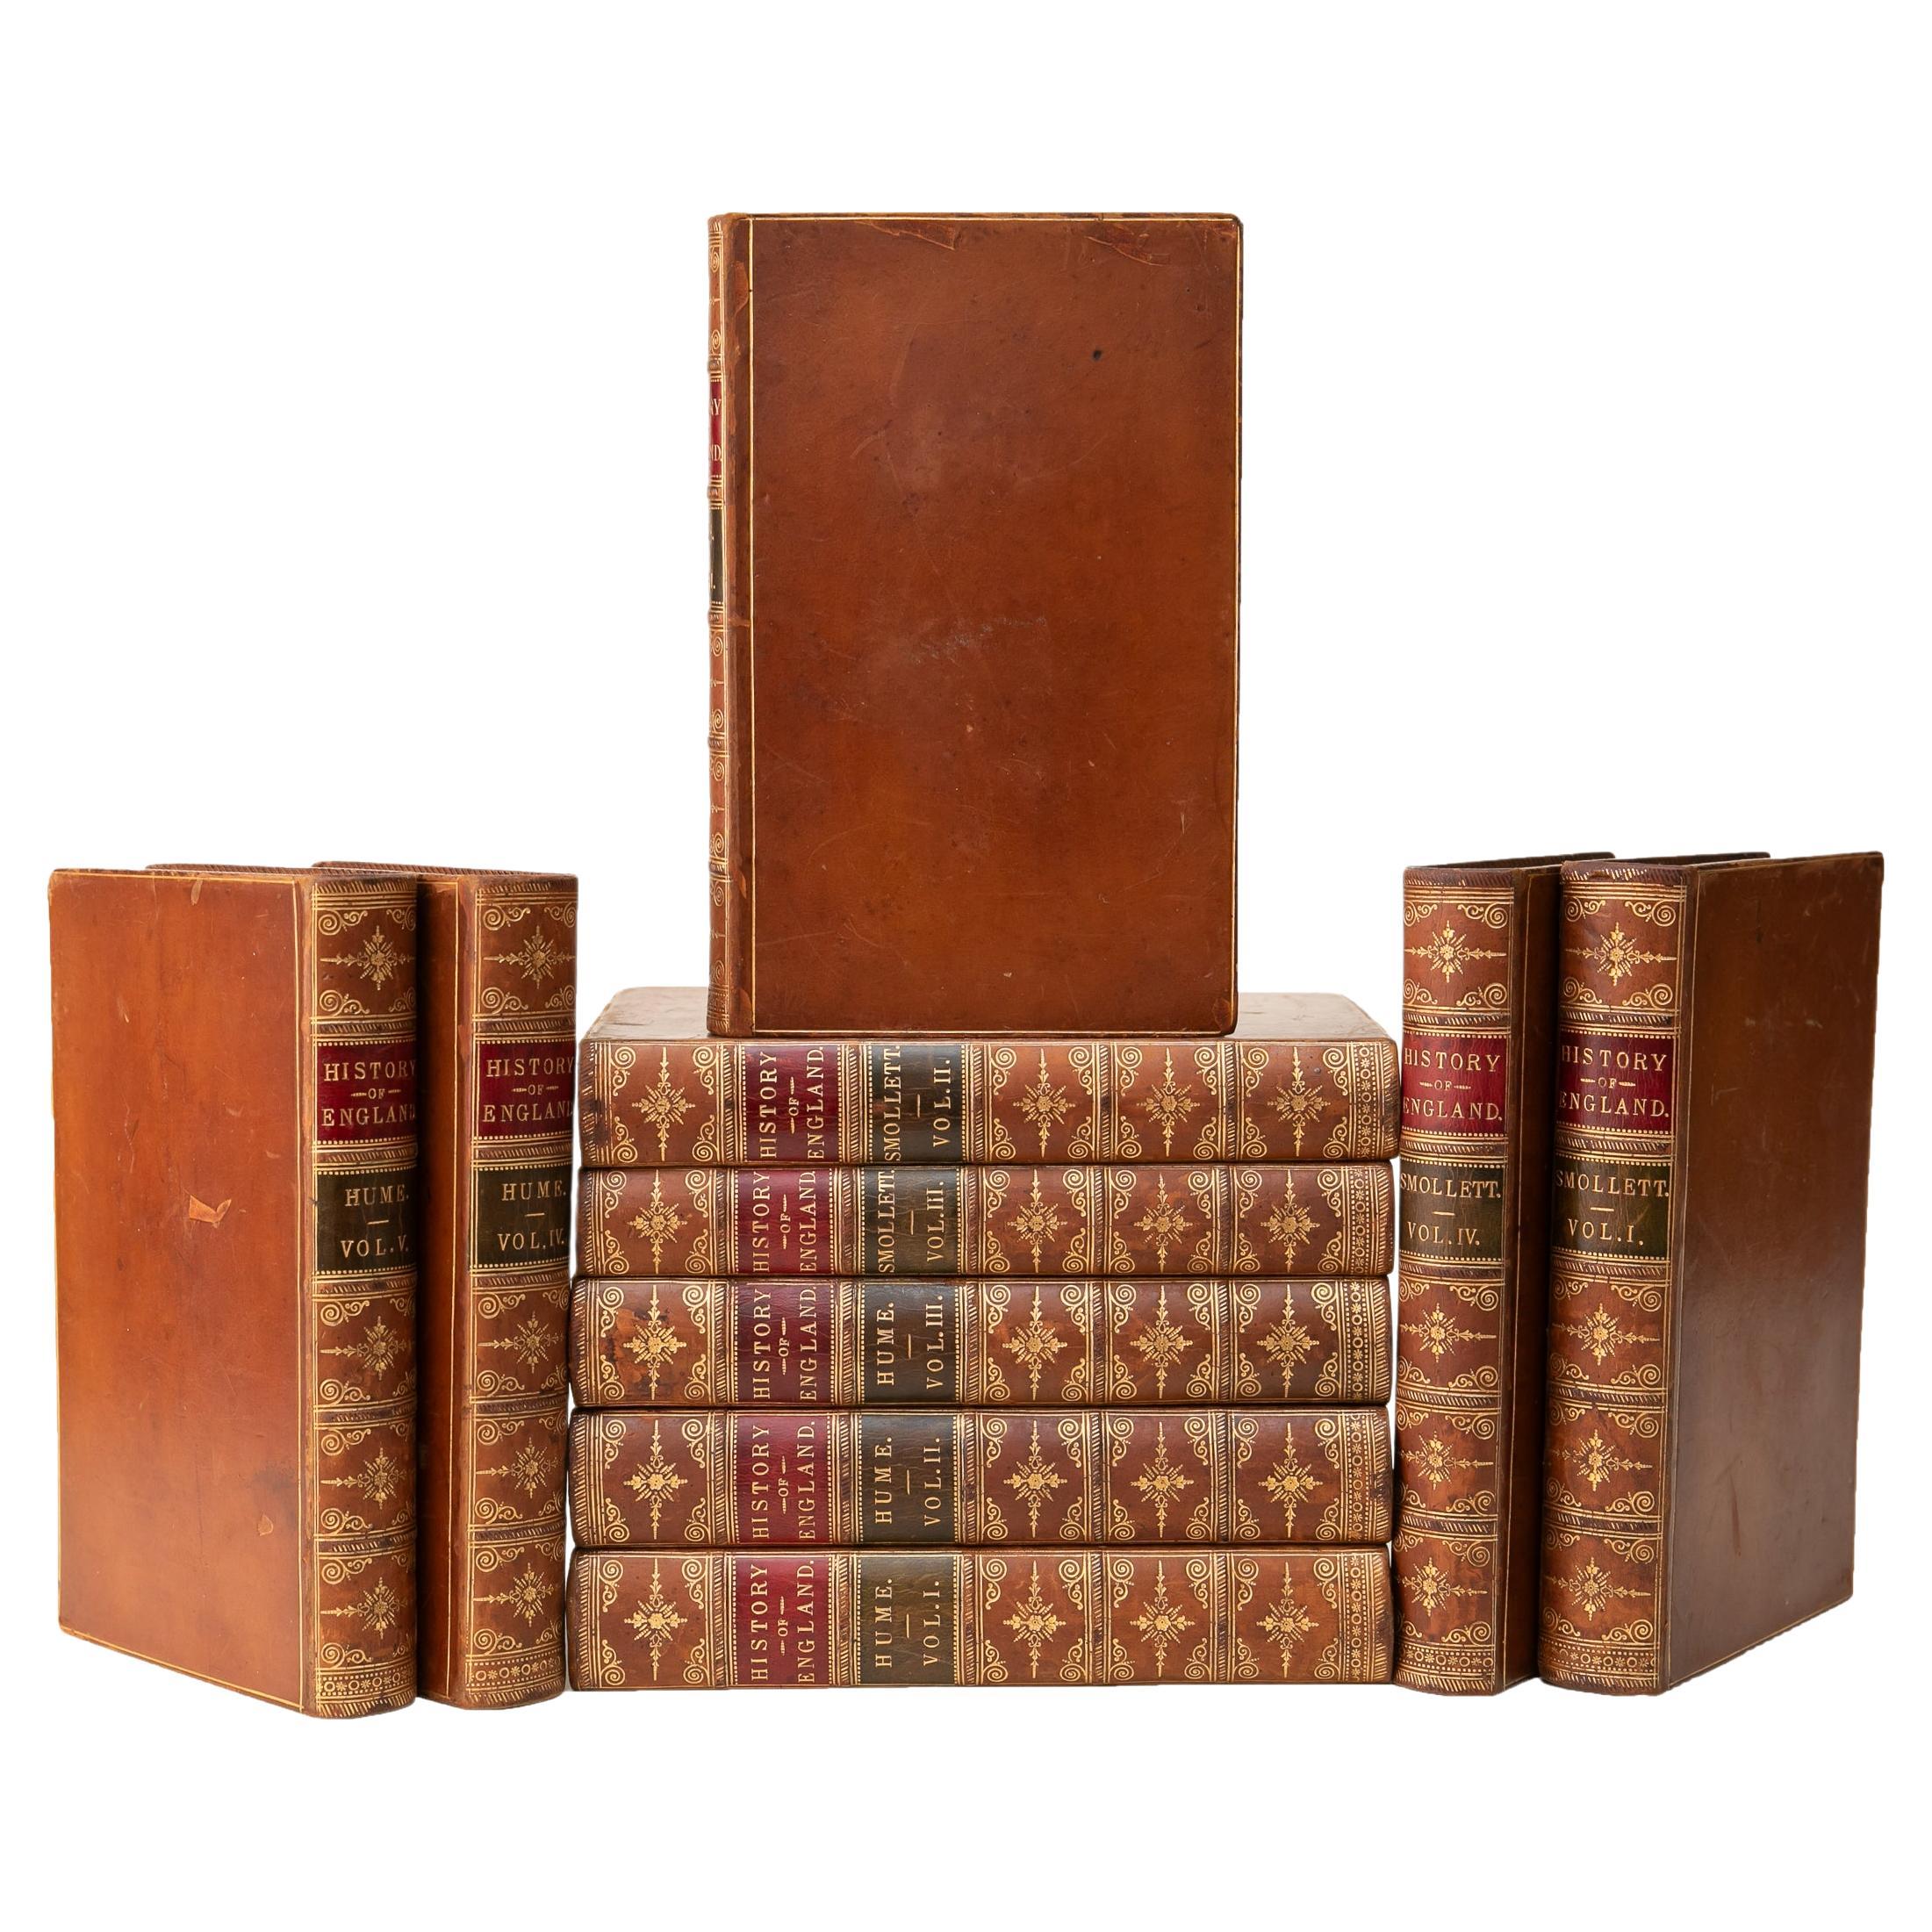 10 Volumes. David Hume. History of England. For Sale